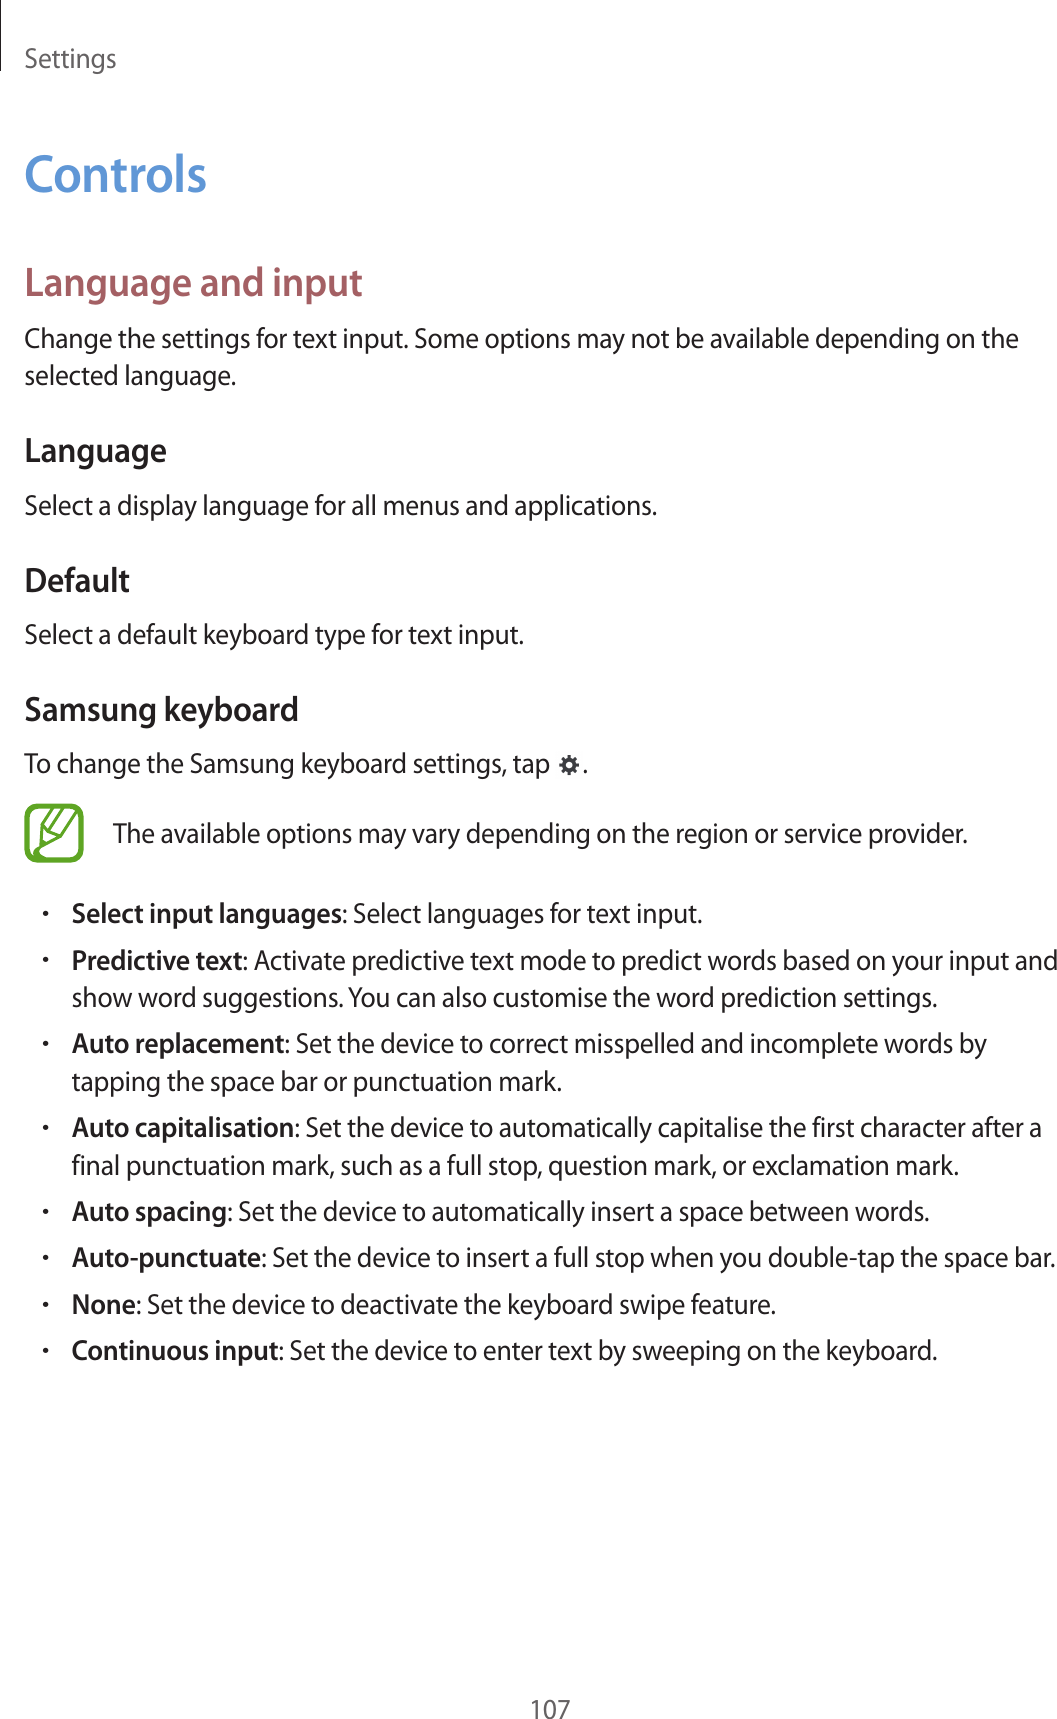 Settings107ControlsLanguage and inputChange the settings for text input. Some options may not be available depending on the selected language.LanguageSelect a display language for all menus and applications.DefaultSelect a default keyboard type for text input.Samsung keyboardTo change the Samsung keyboard settings, tap  .The available options may vary depending on the region or service provider.•Select input languages: Select languages for text input.•Predictive text: Activate predictive text mode to predict words based on your input and show word suggestions. You can also customise the word prediction settings.•Auto replacement: Set the device to correct misspelled and incomplete words by tapping the space bar or punctuation mark.•Auto capitalisation: Set the device to automatically capitalise the first character after a final punctuation mark, such as a full stop, question mark, or exclamation mark.•Auto spacing: Set the device to automatically insert a space between words.•Auto-punctuate: Set the device to insert a full stop when you double-tap the space bar.•None: Set the device to deactivate the keyboard swipe feature.•Continuous input: Set the device to enter text by sweeping on the keyboard.